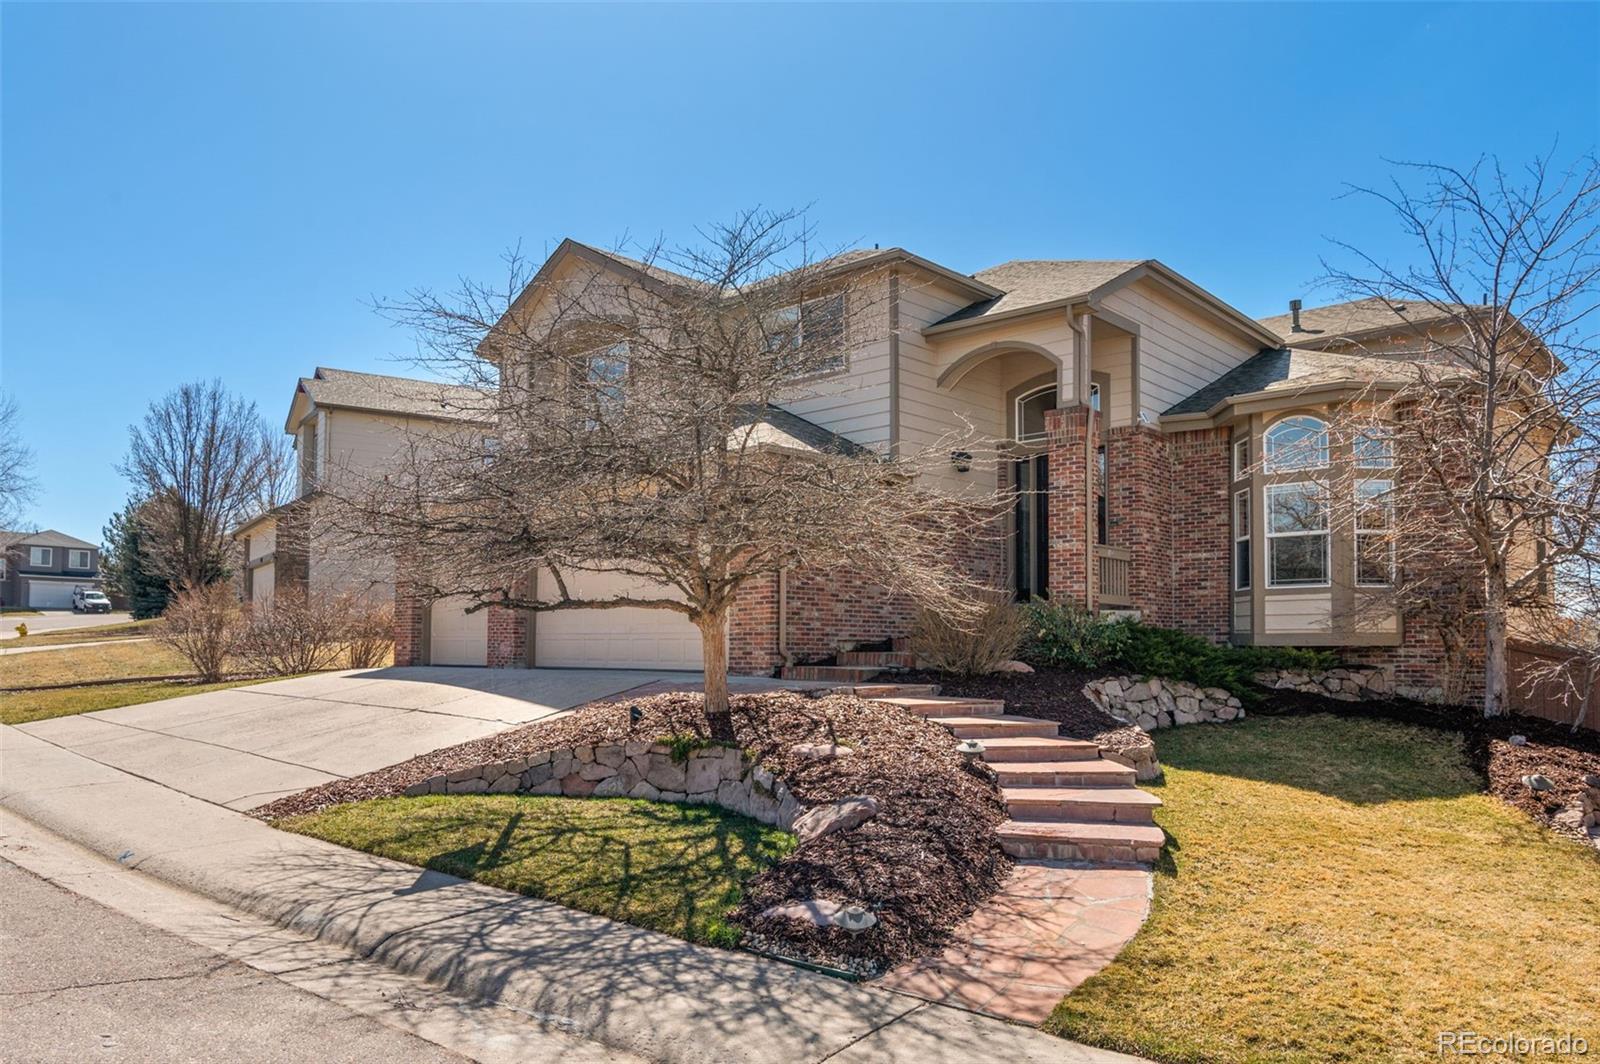 Report Image for 9326  Desert Willow Trail,Highlands Ranch, Colorado